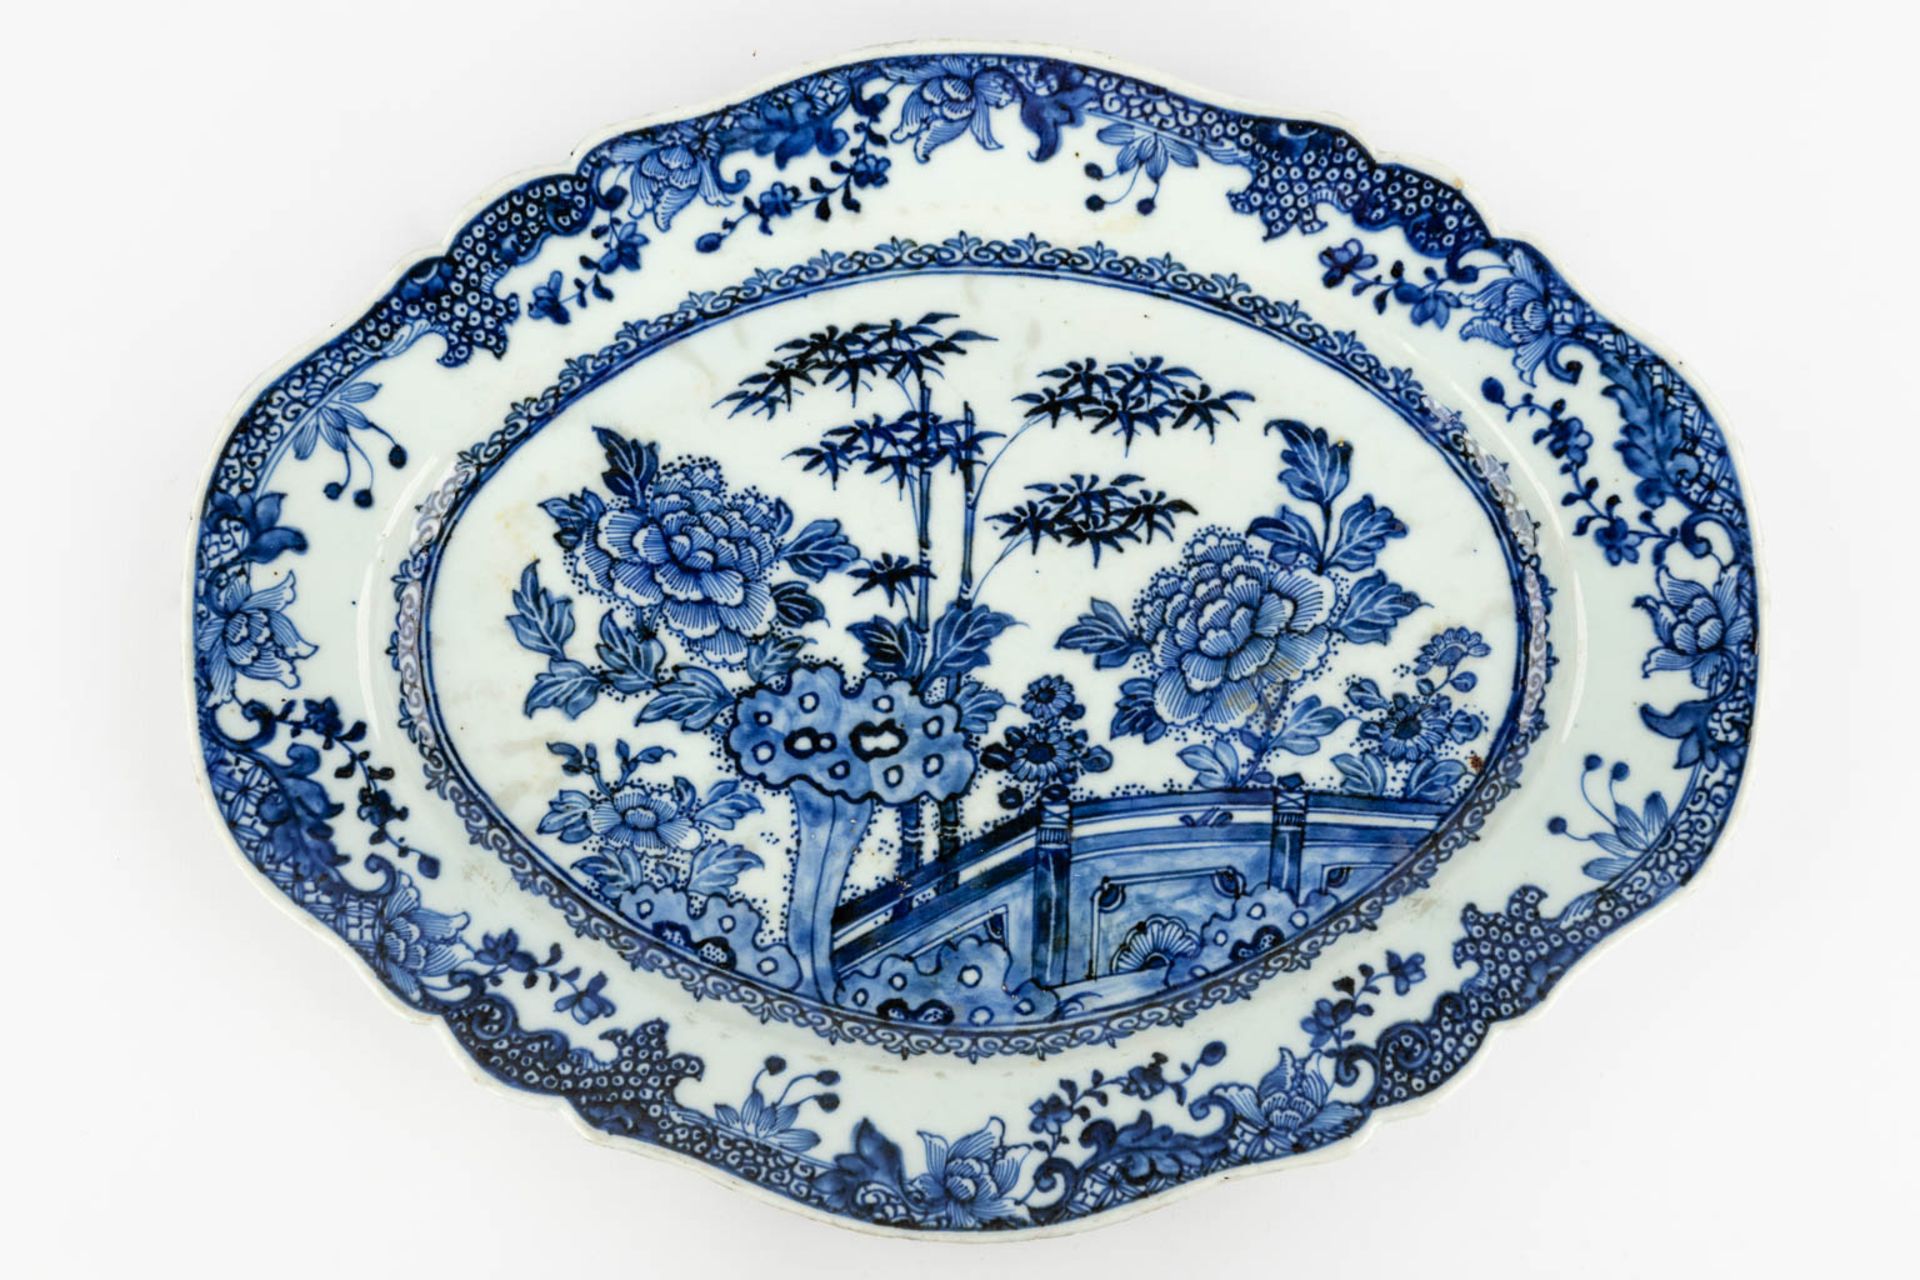 A collection of 7 Chinese plates and platters made of blue-white porcelain. (34 x 40,5 cm) - Image 21 of 23